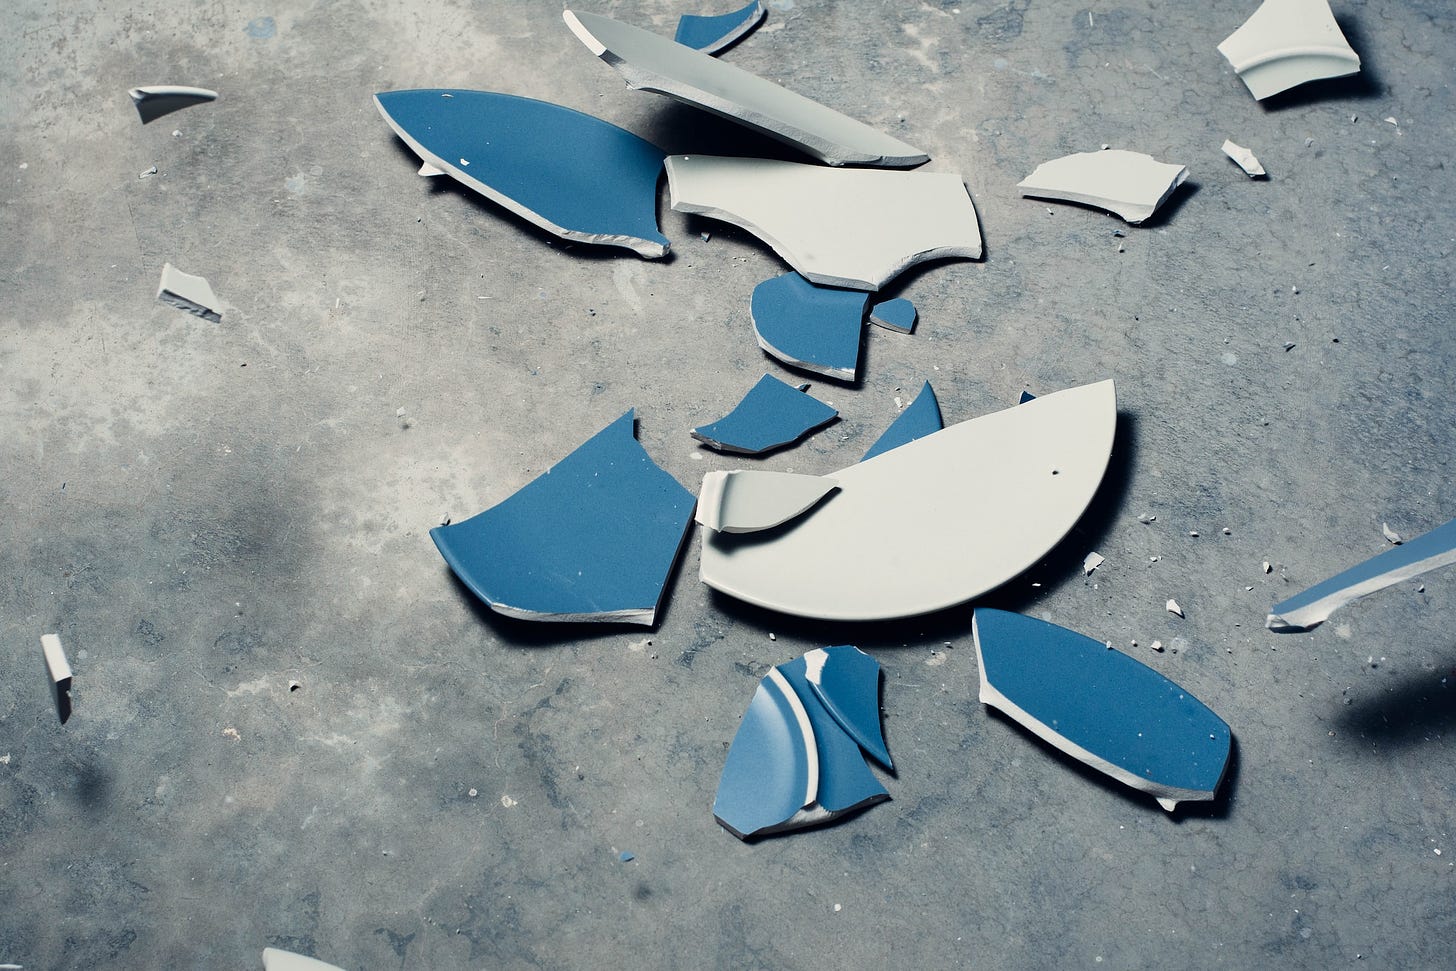 A blue plate shattered on a grey floor.